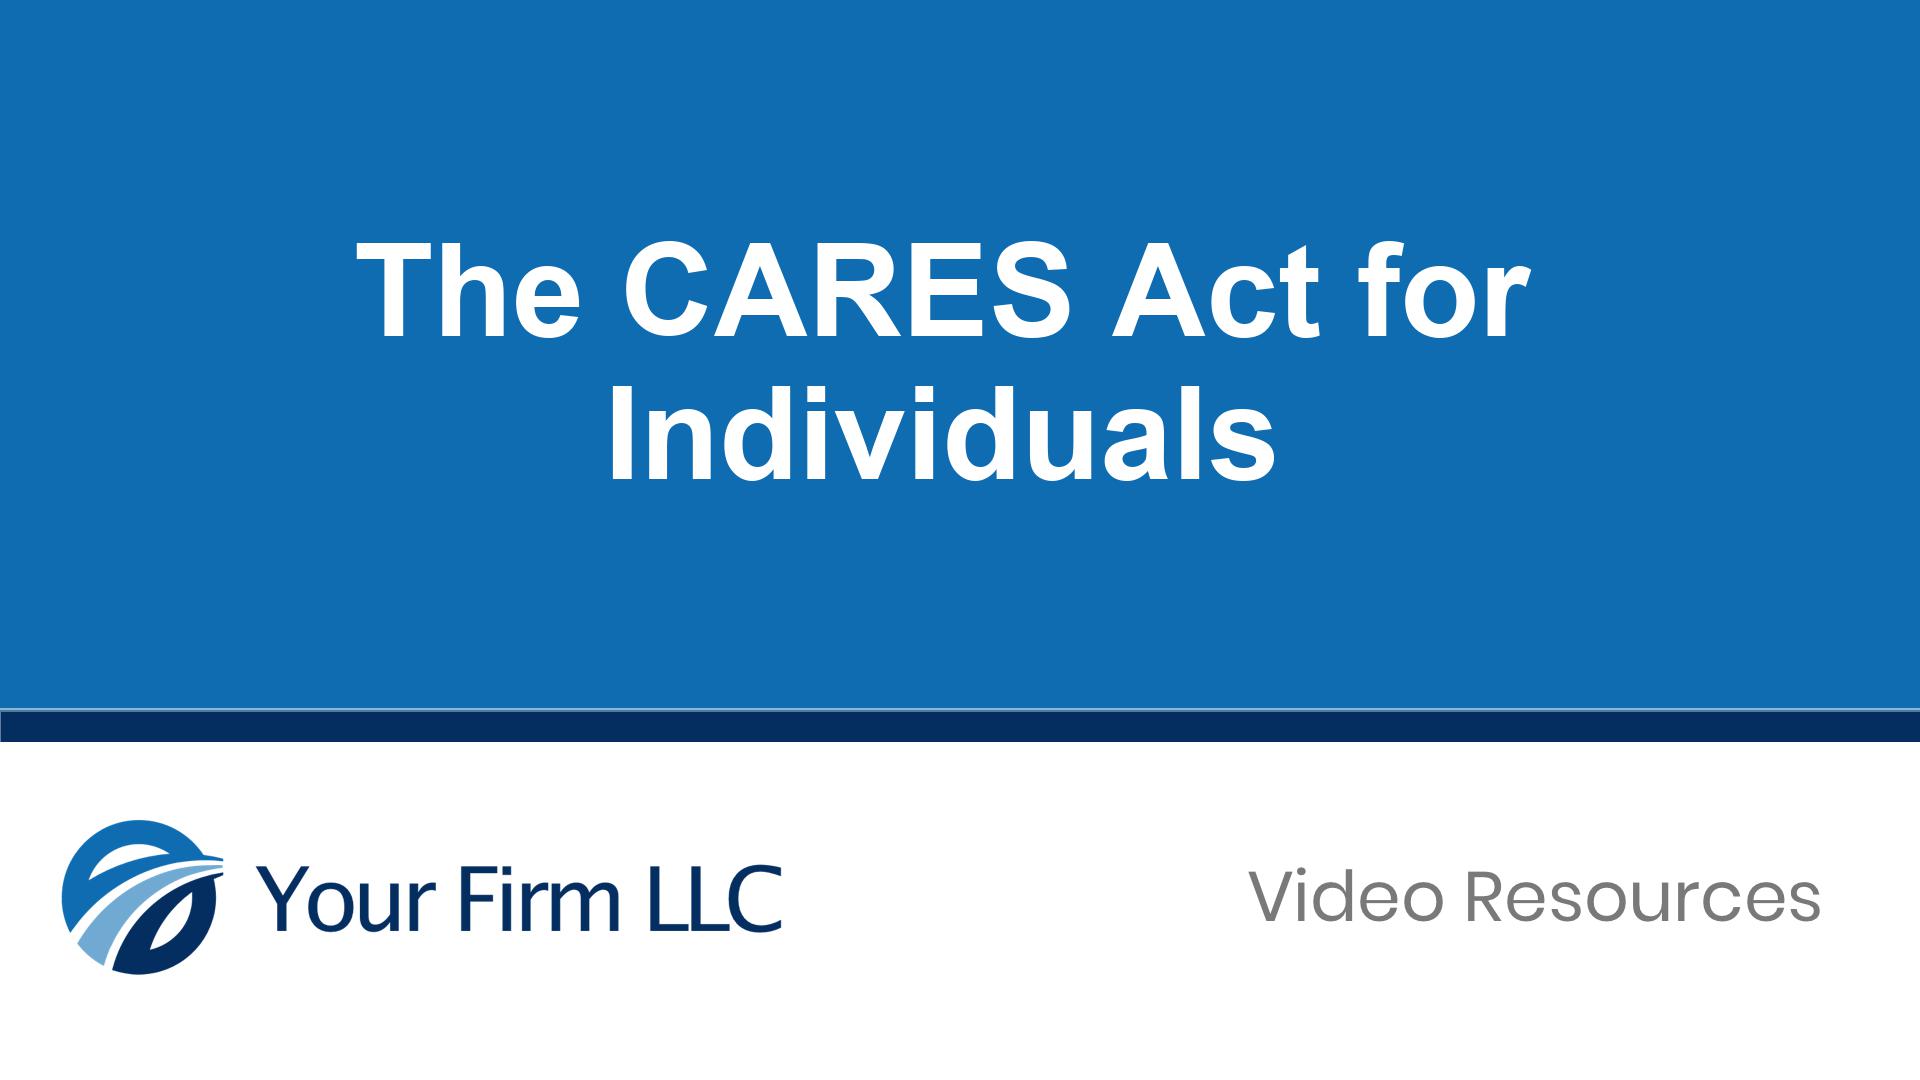 The CARES Act for Individuals